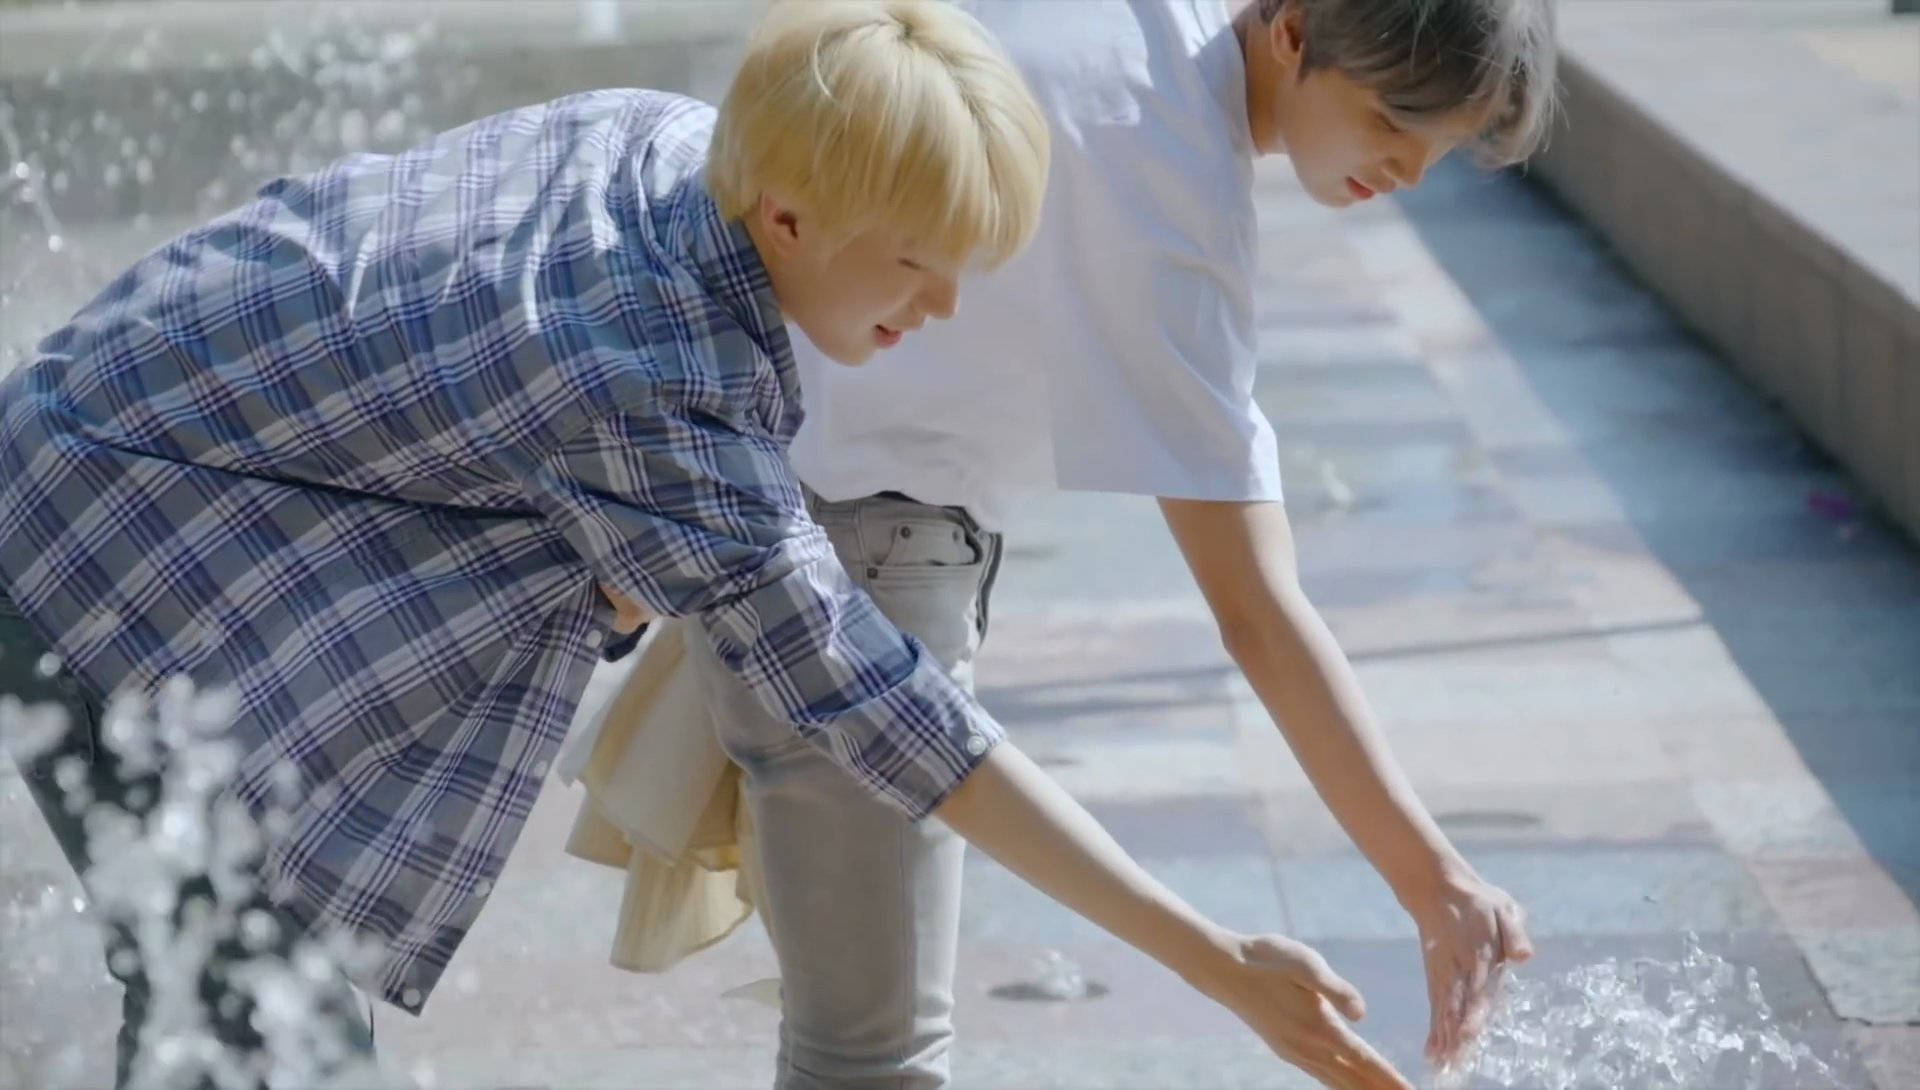 Nct 127 Jungwoo Haechan Playing With Water Background